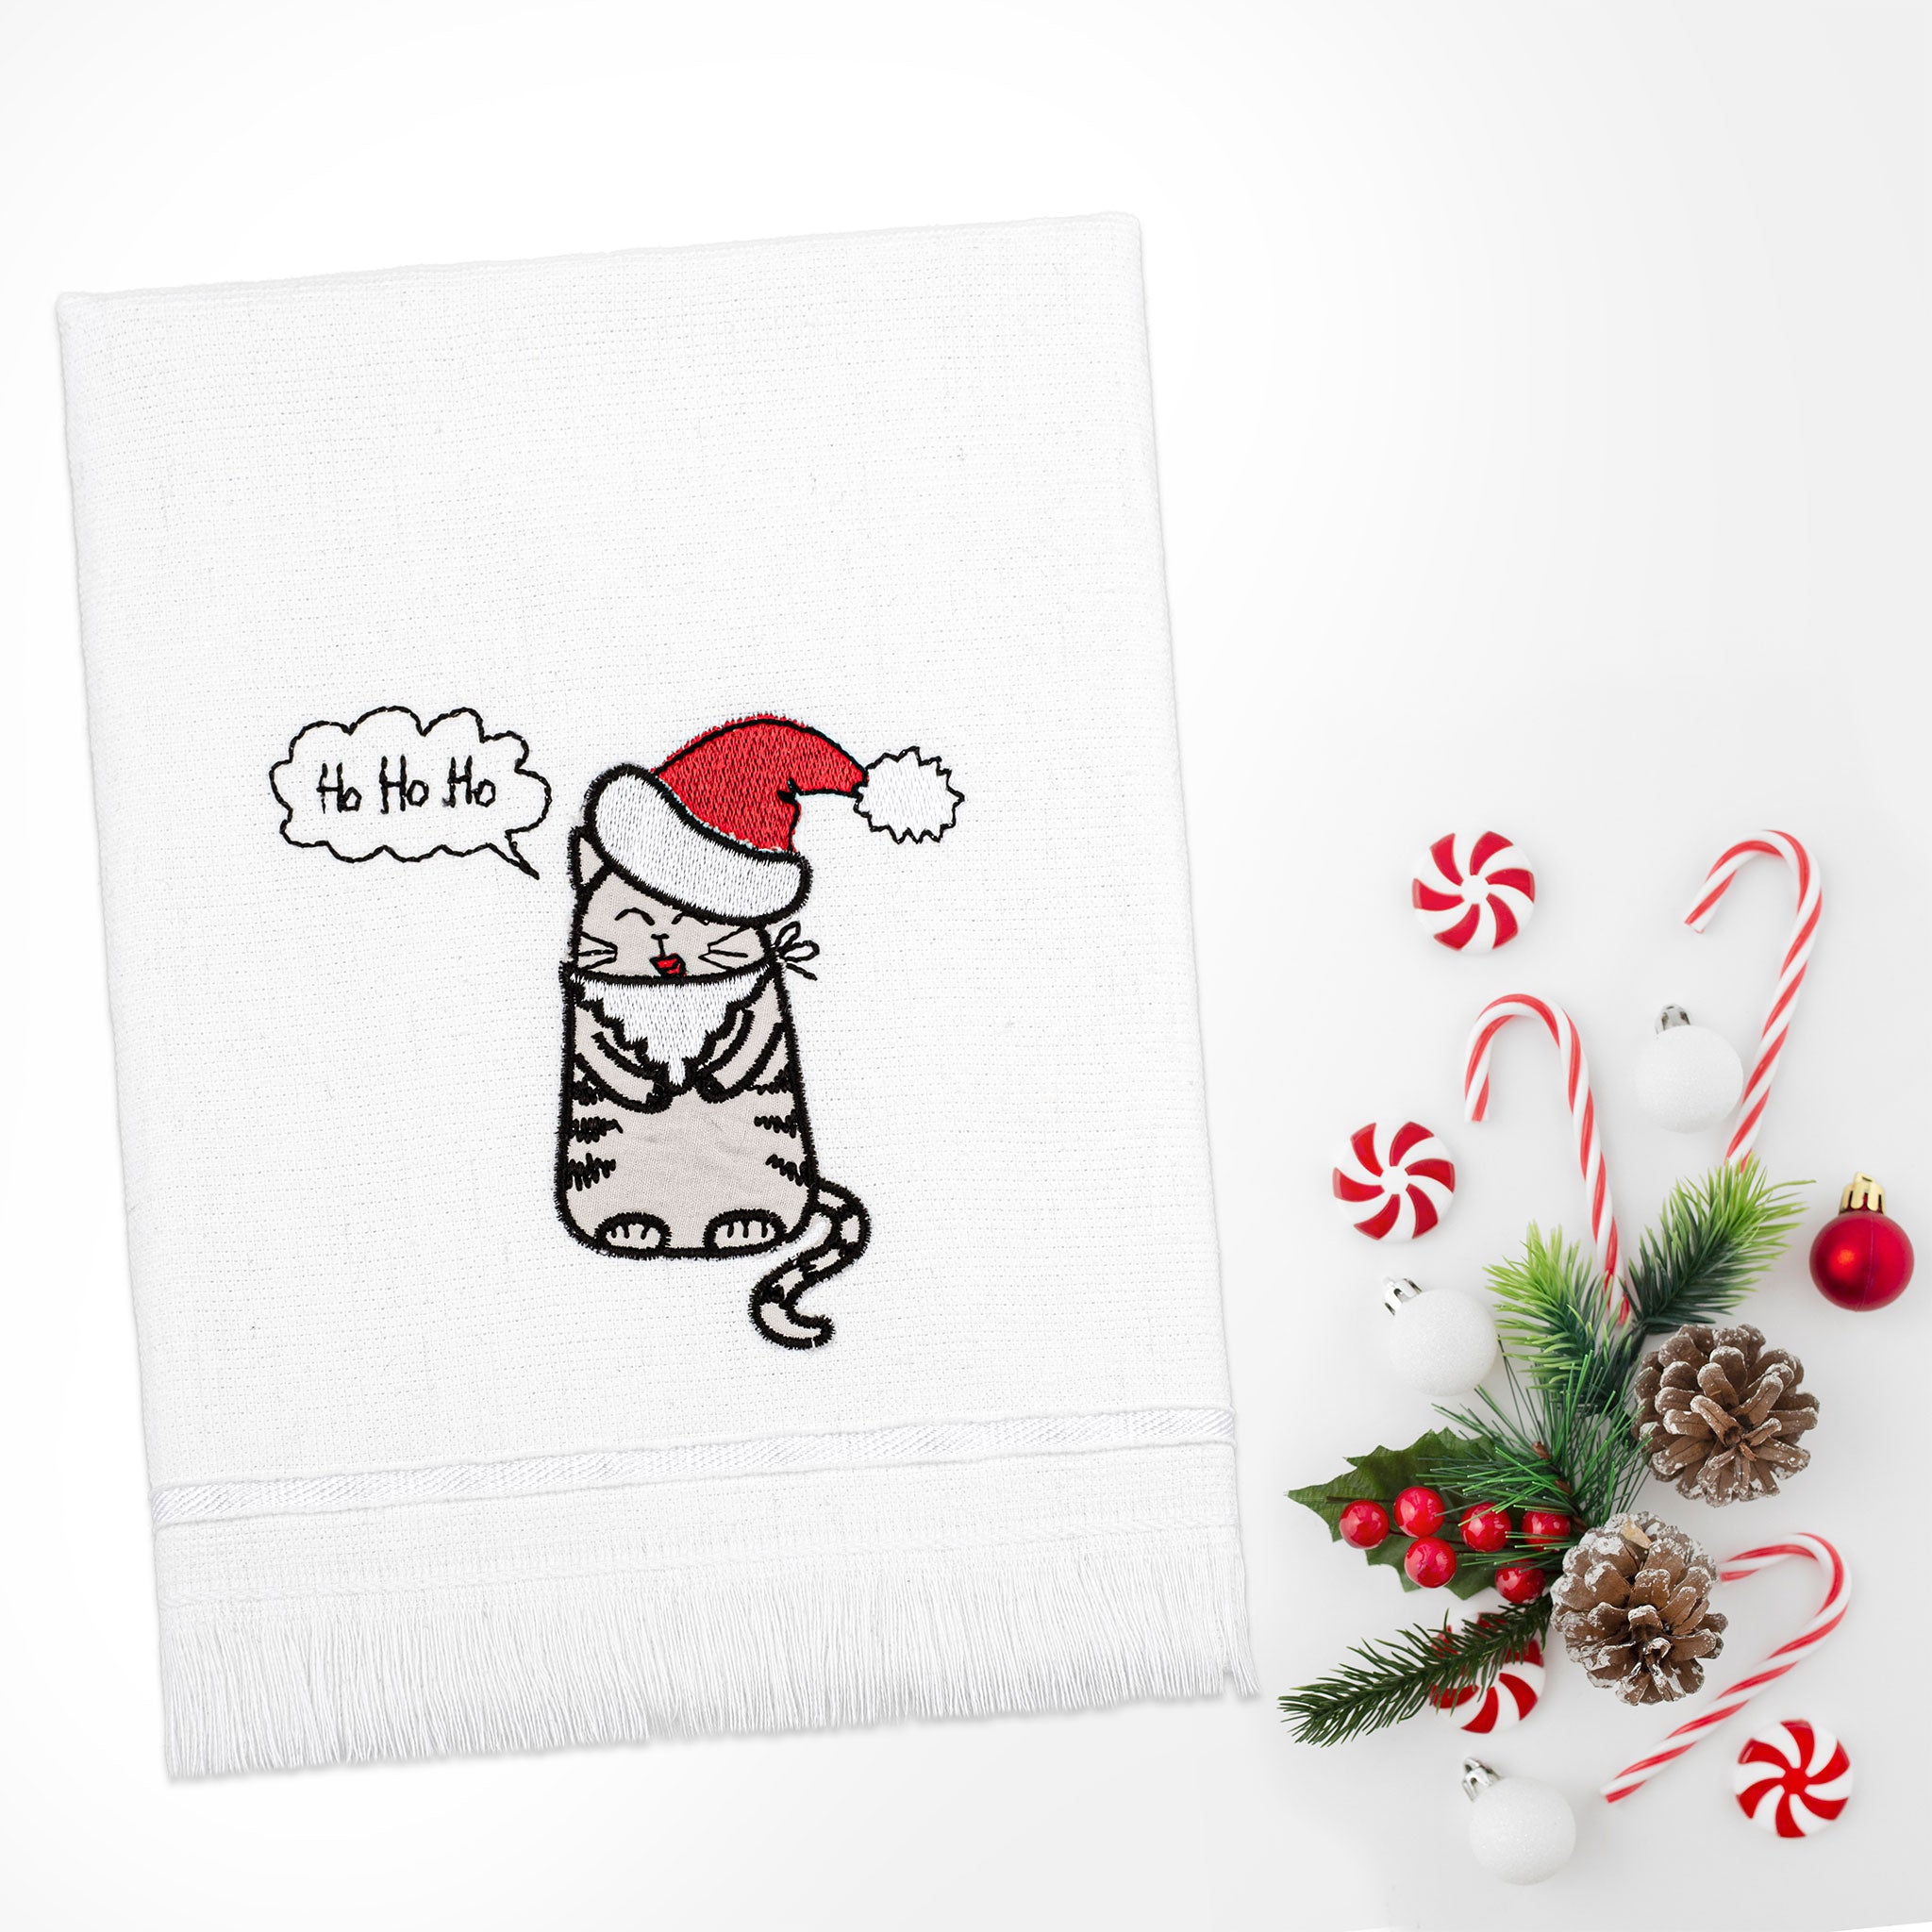  American Soft Linen - Christmas Towels Set 2 Packed Embroidered Turkish Cotton Hand Towels - Joy Cat - 6